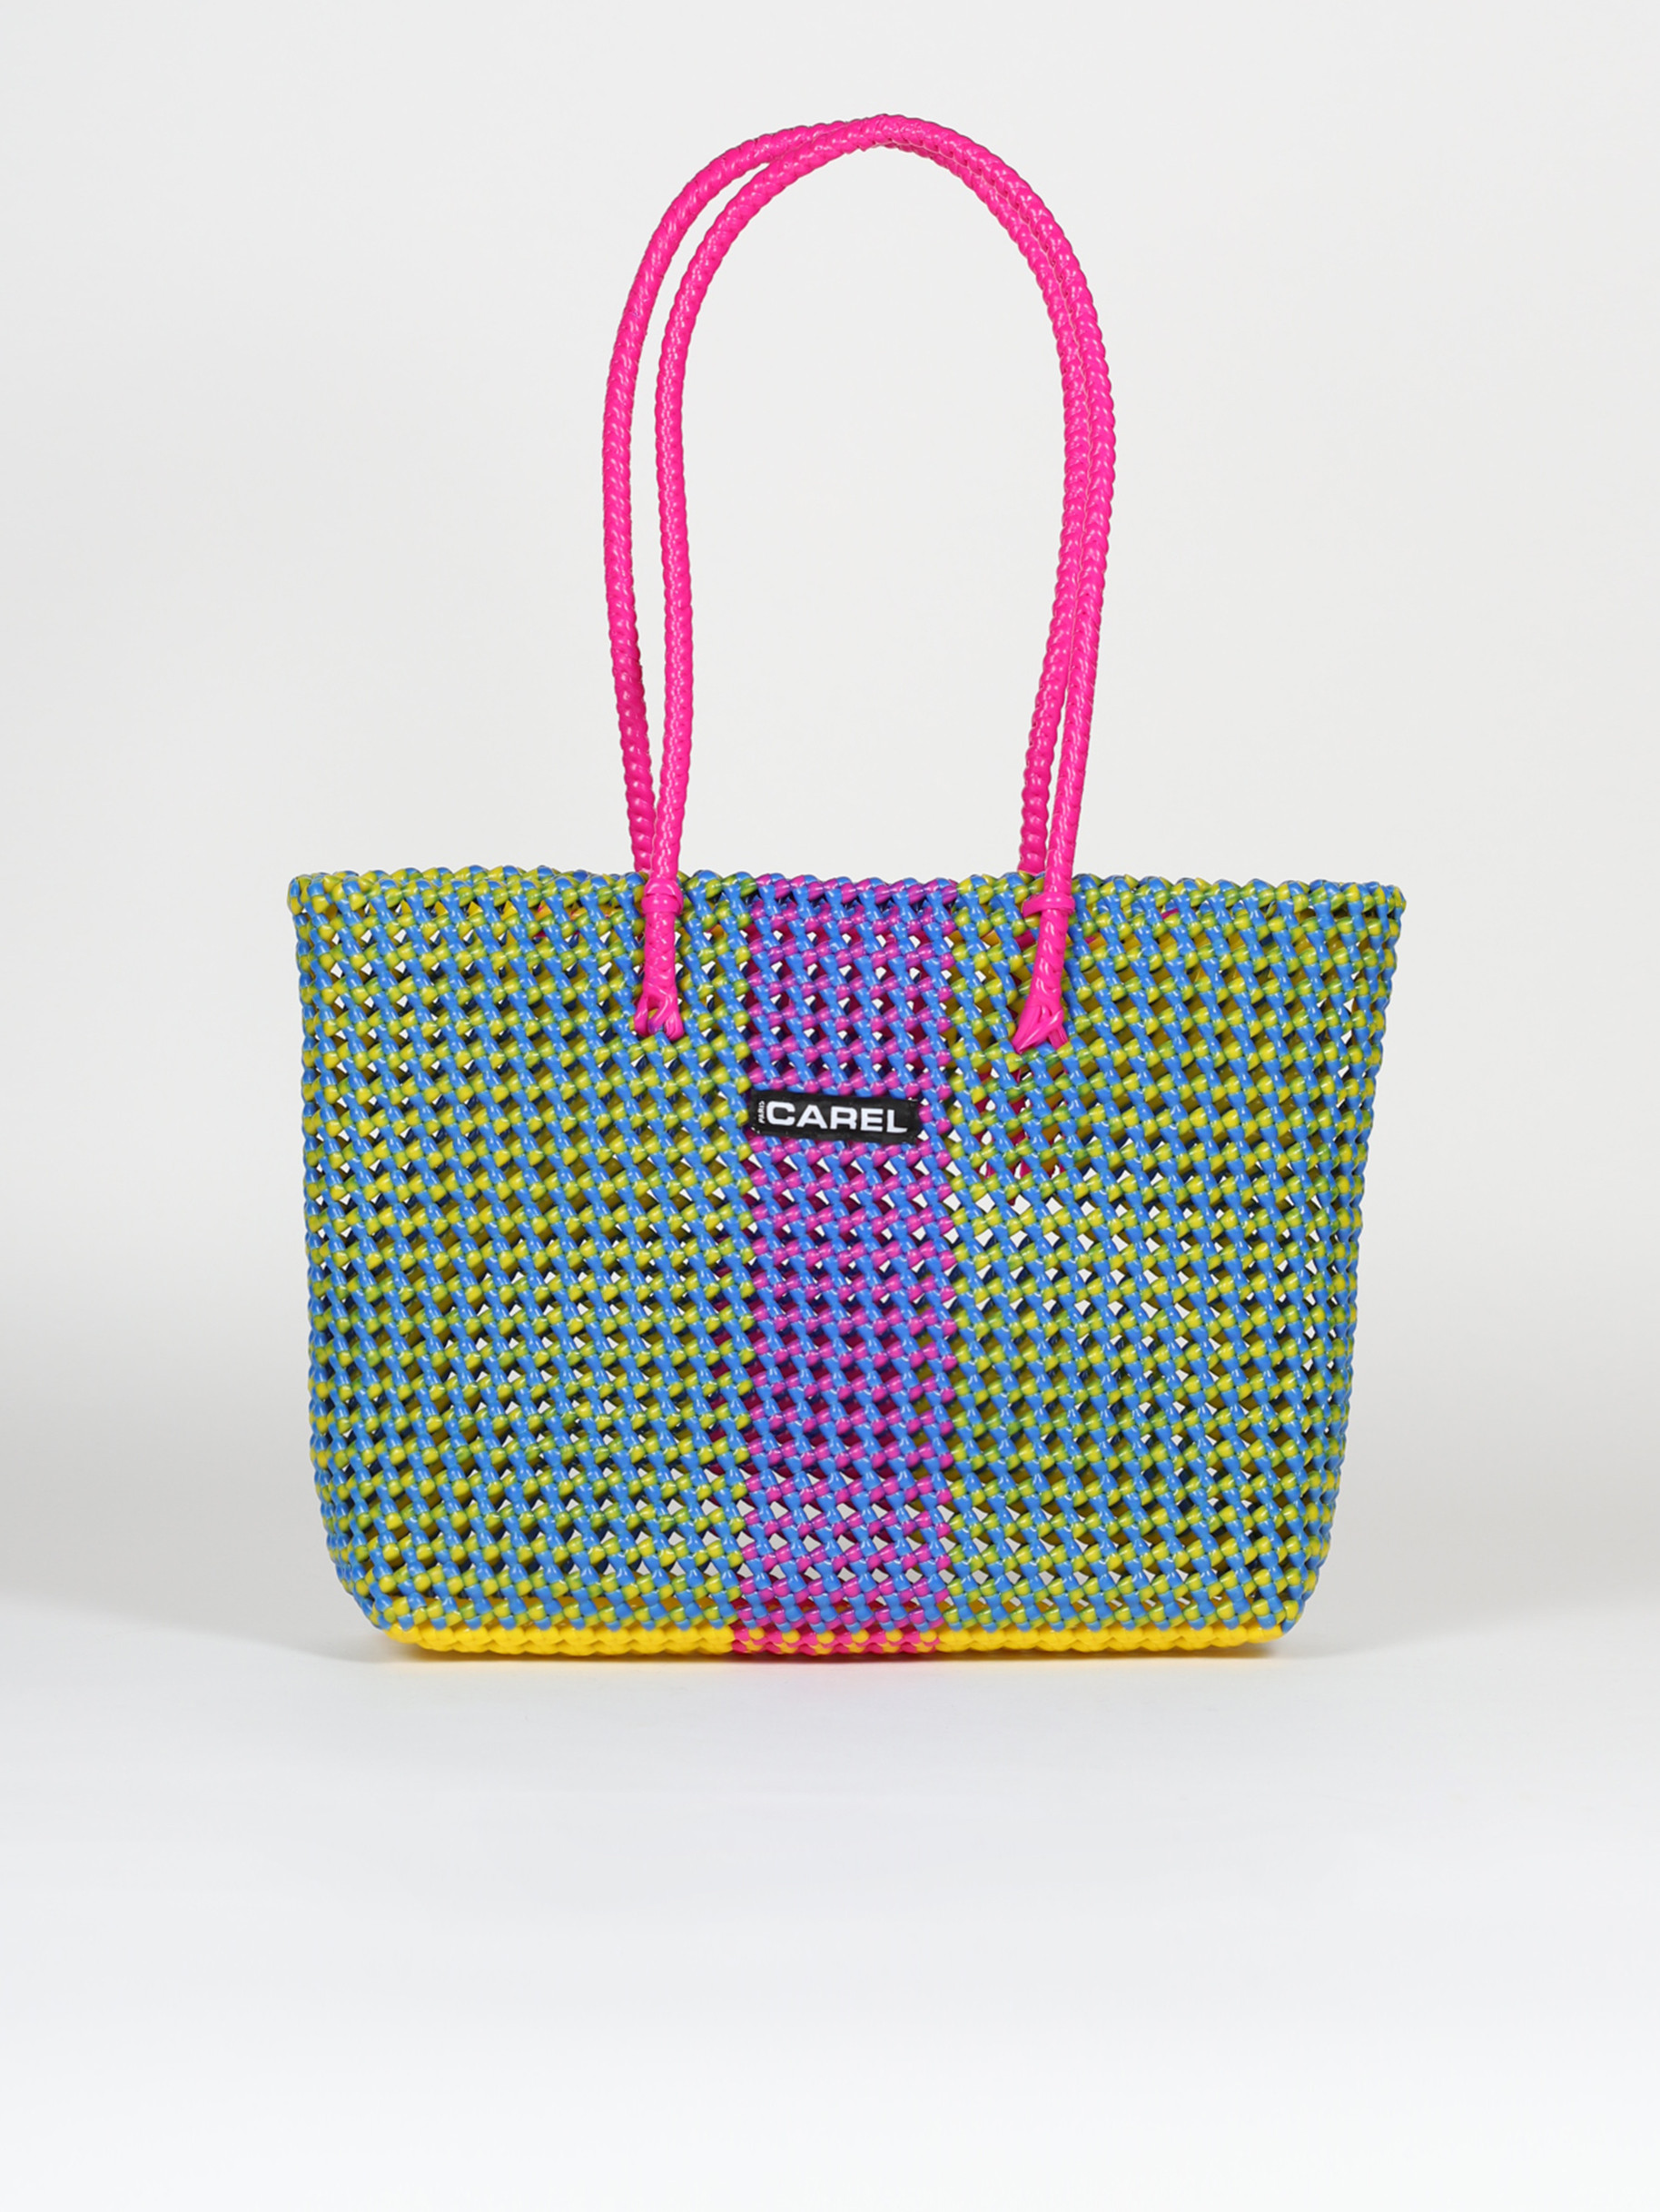 Blue, yellow and pink bag